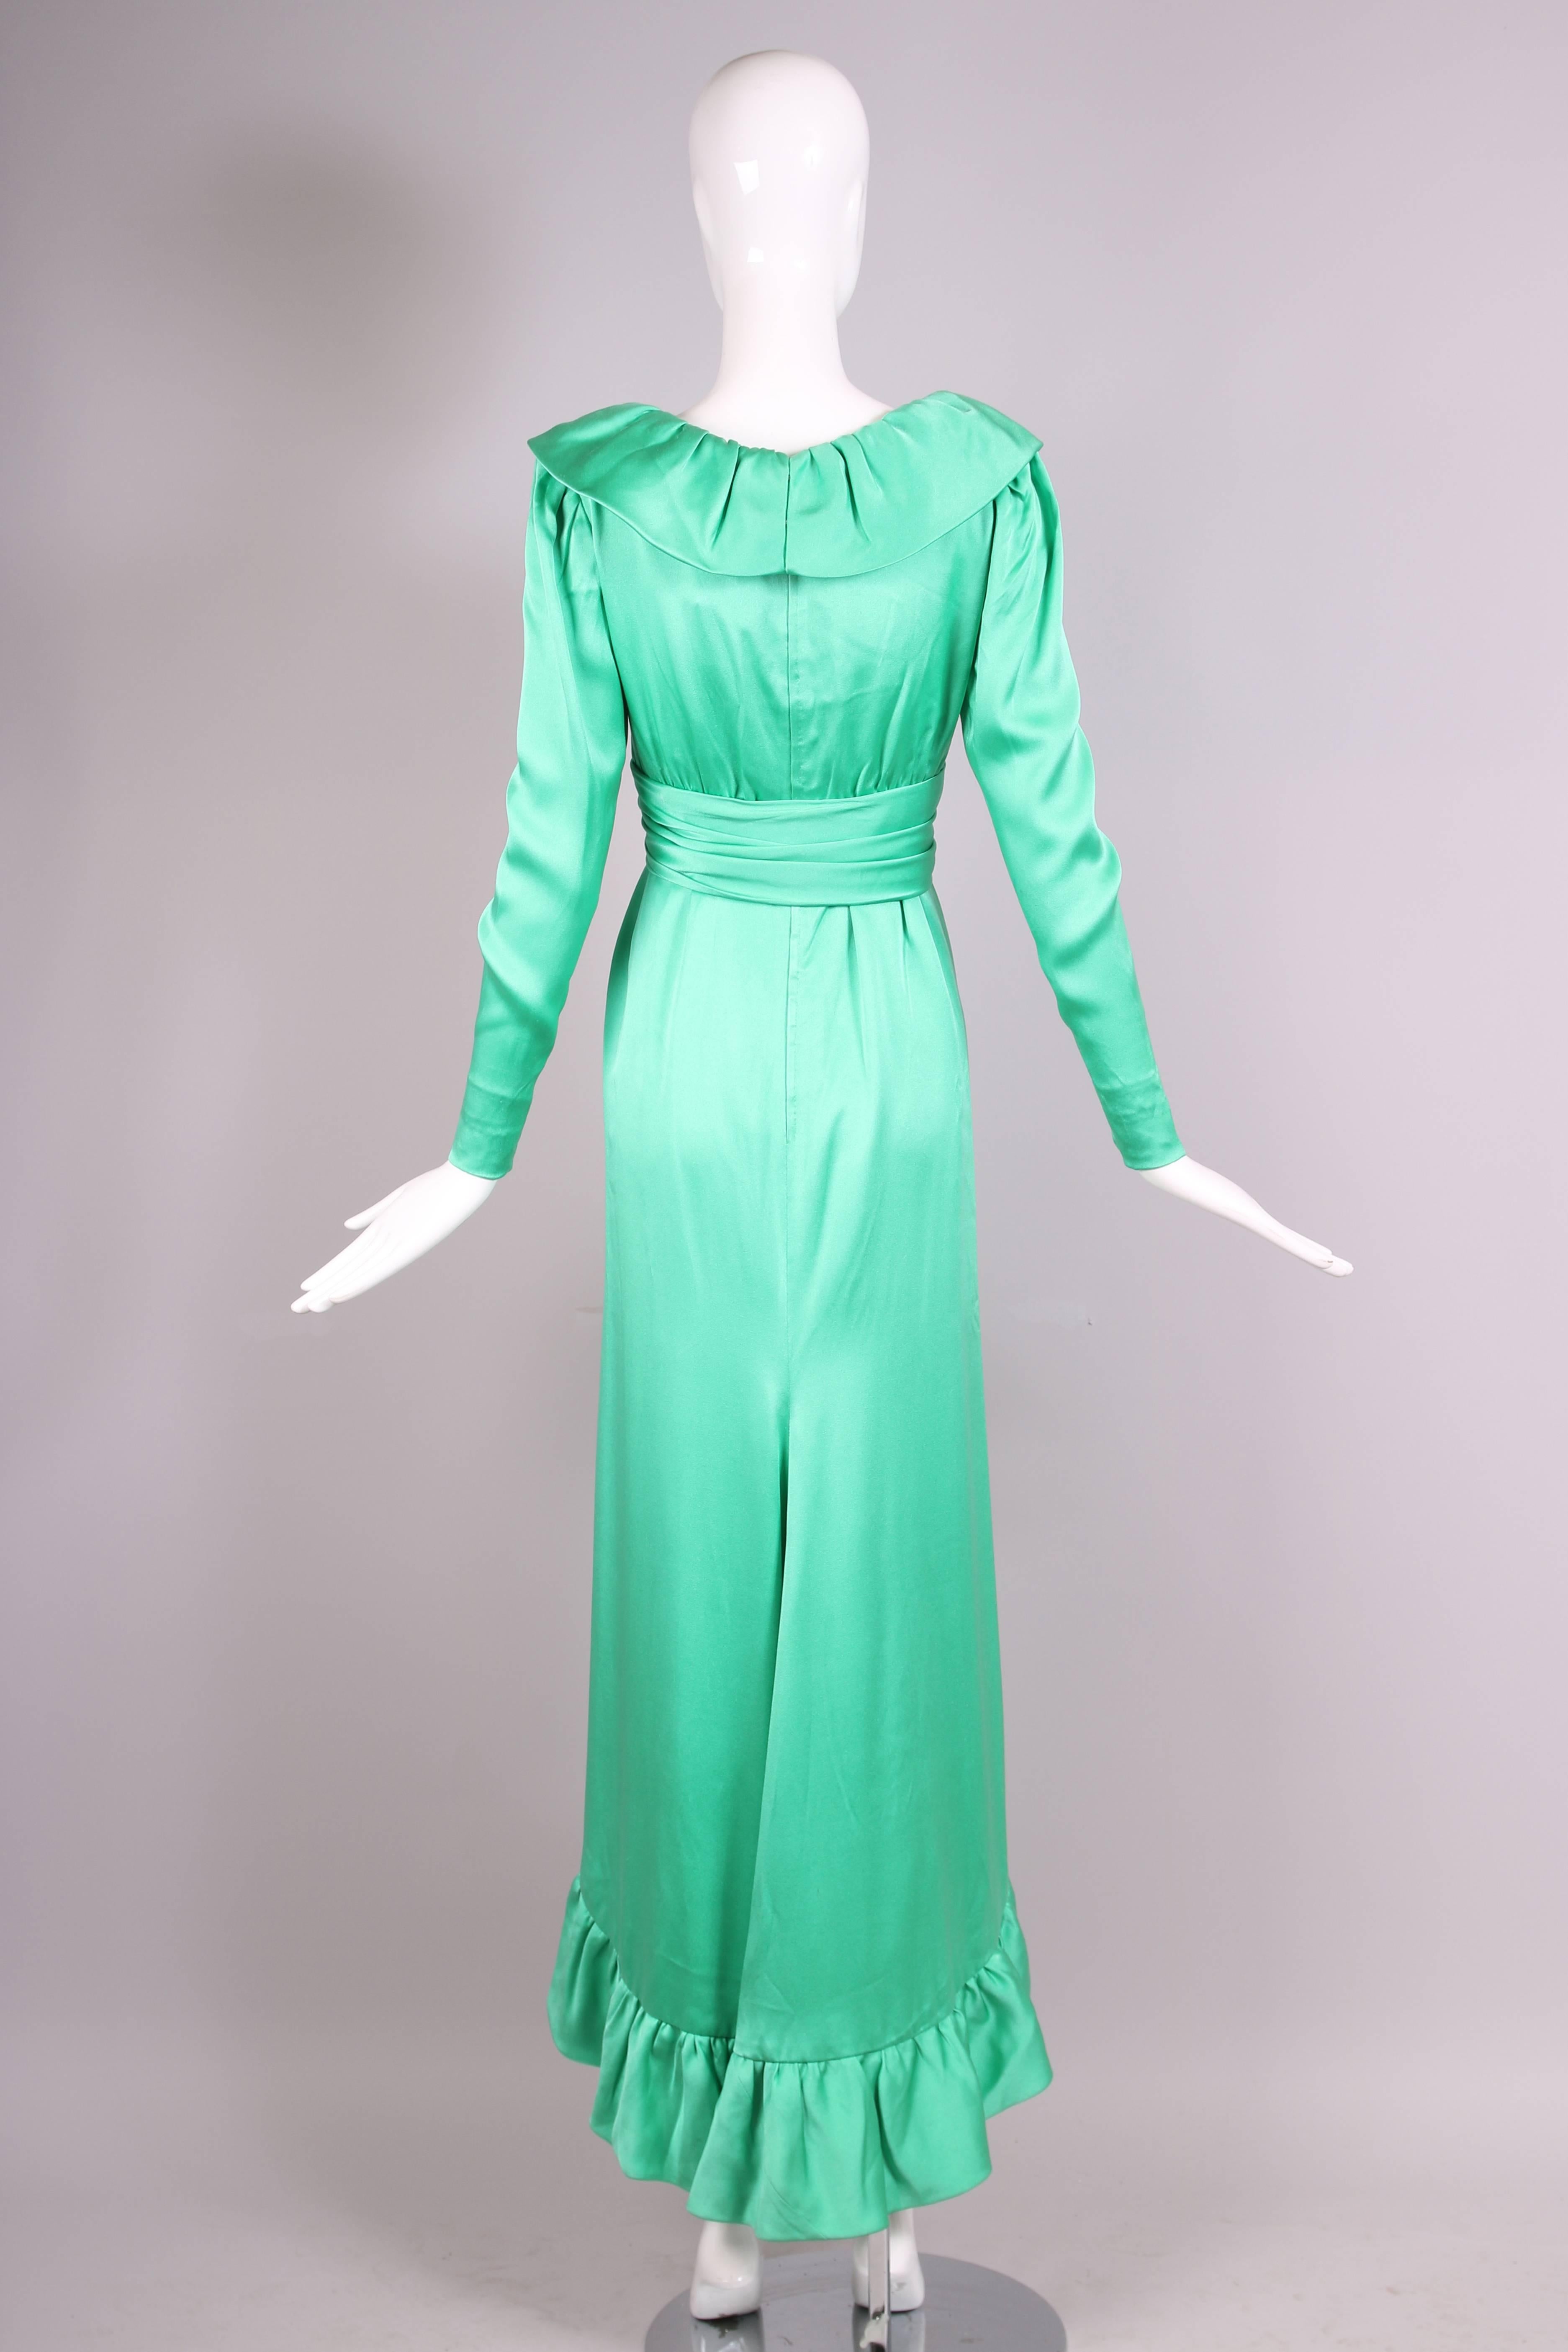 Givenchy Haute Couture Sea Foam Green Silk Gown With Ruffle Neckline No 70369 1